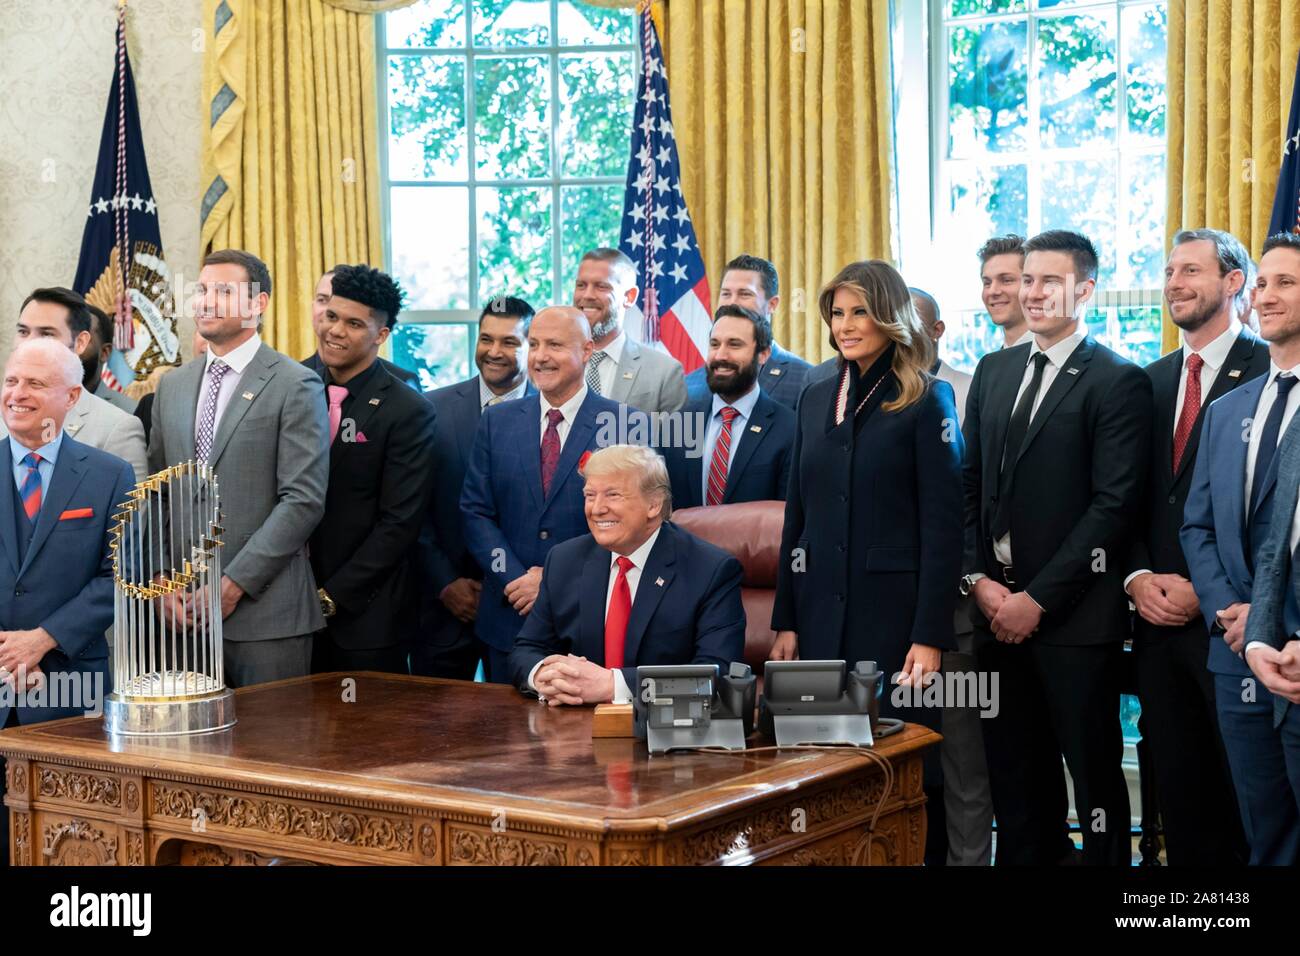 Washington, United States of America. 04 November, 2019. U.S. President Donald Trump and First Lady Melania Trump pose with members of the Washington Nationals World Series champs during a victory celebration in the Oval Office of the White House November 4, 2019 in Washington, DC.   Credit: Shealah Craighead/White House Photo/Alamy Live News Stock Photo